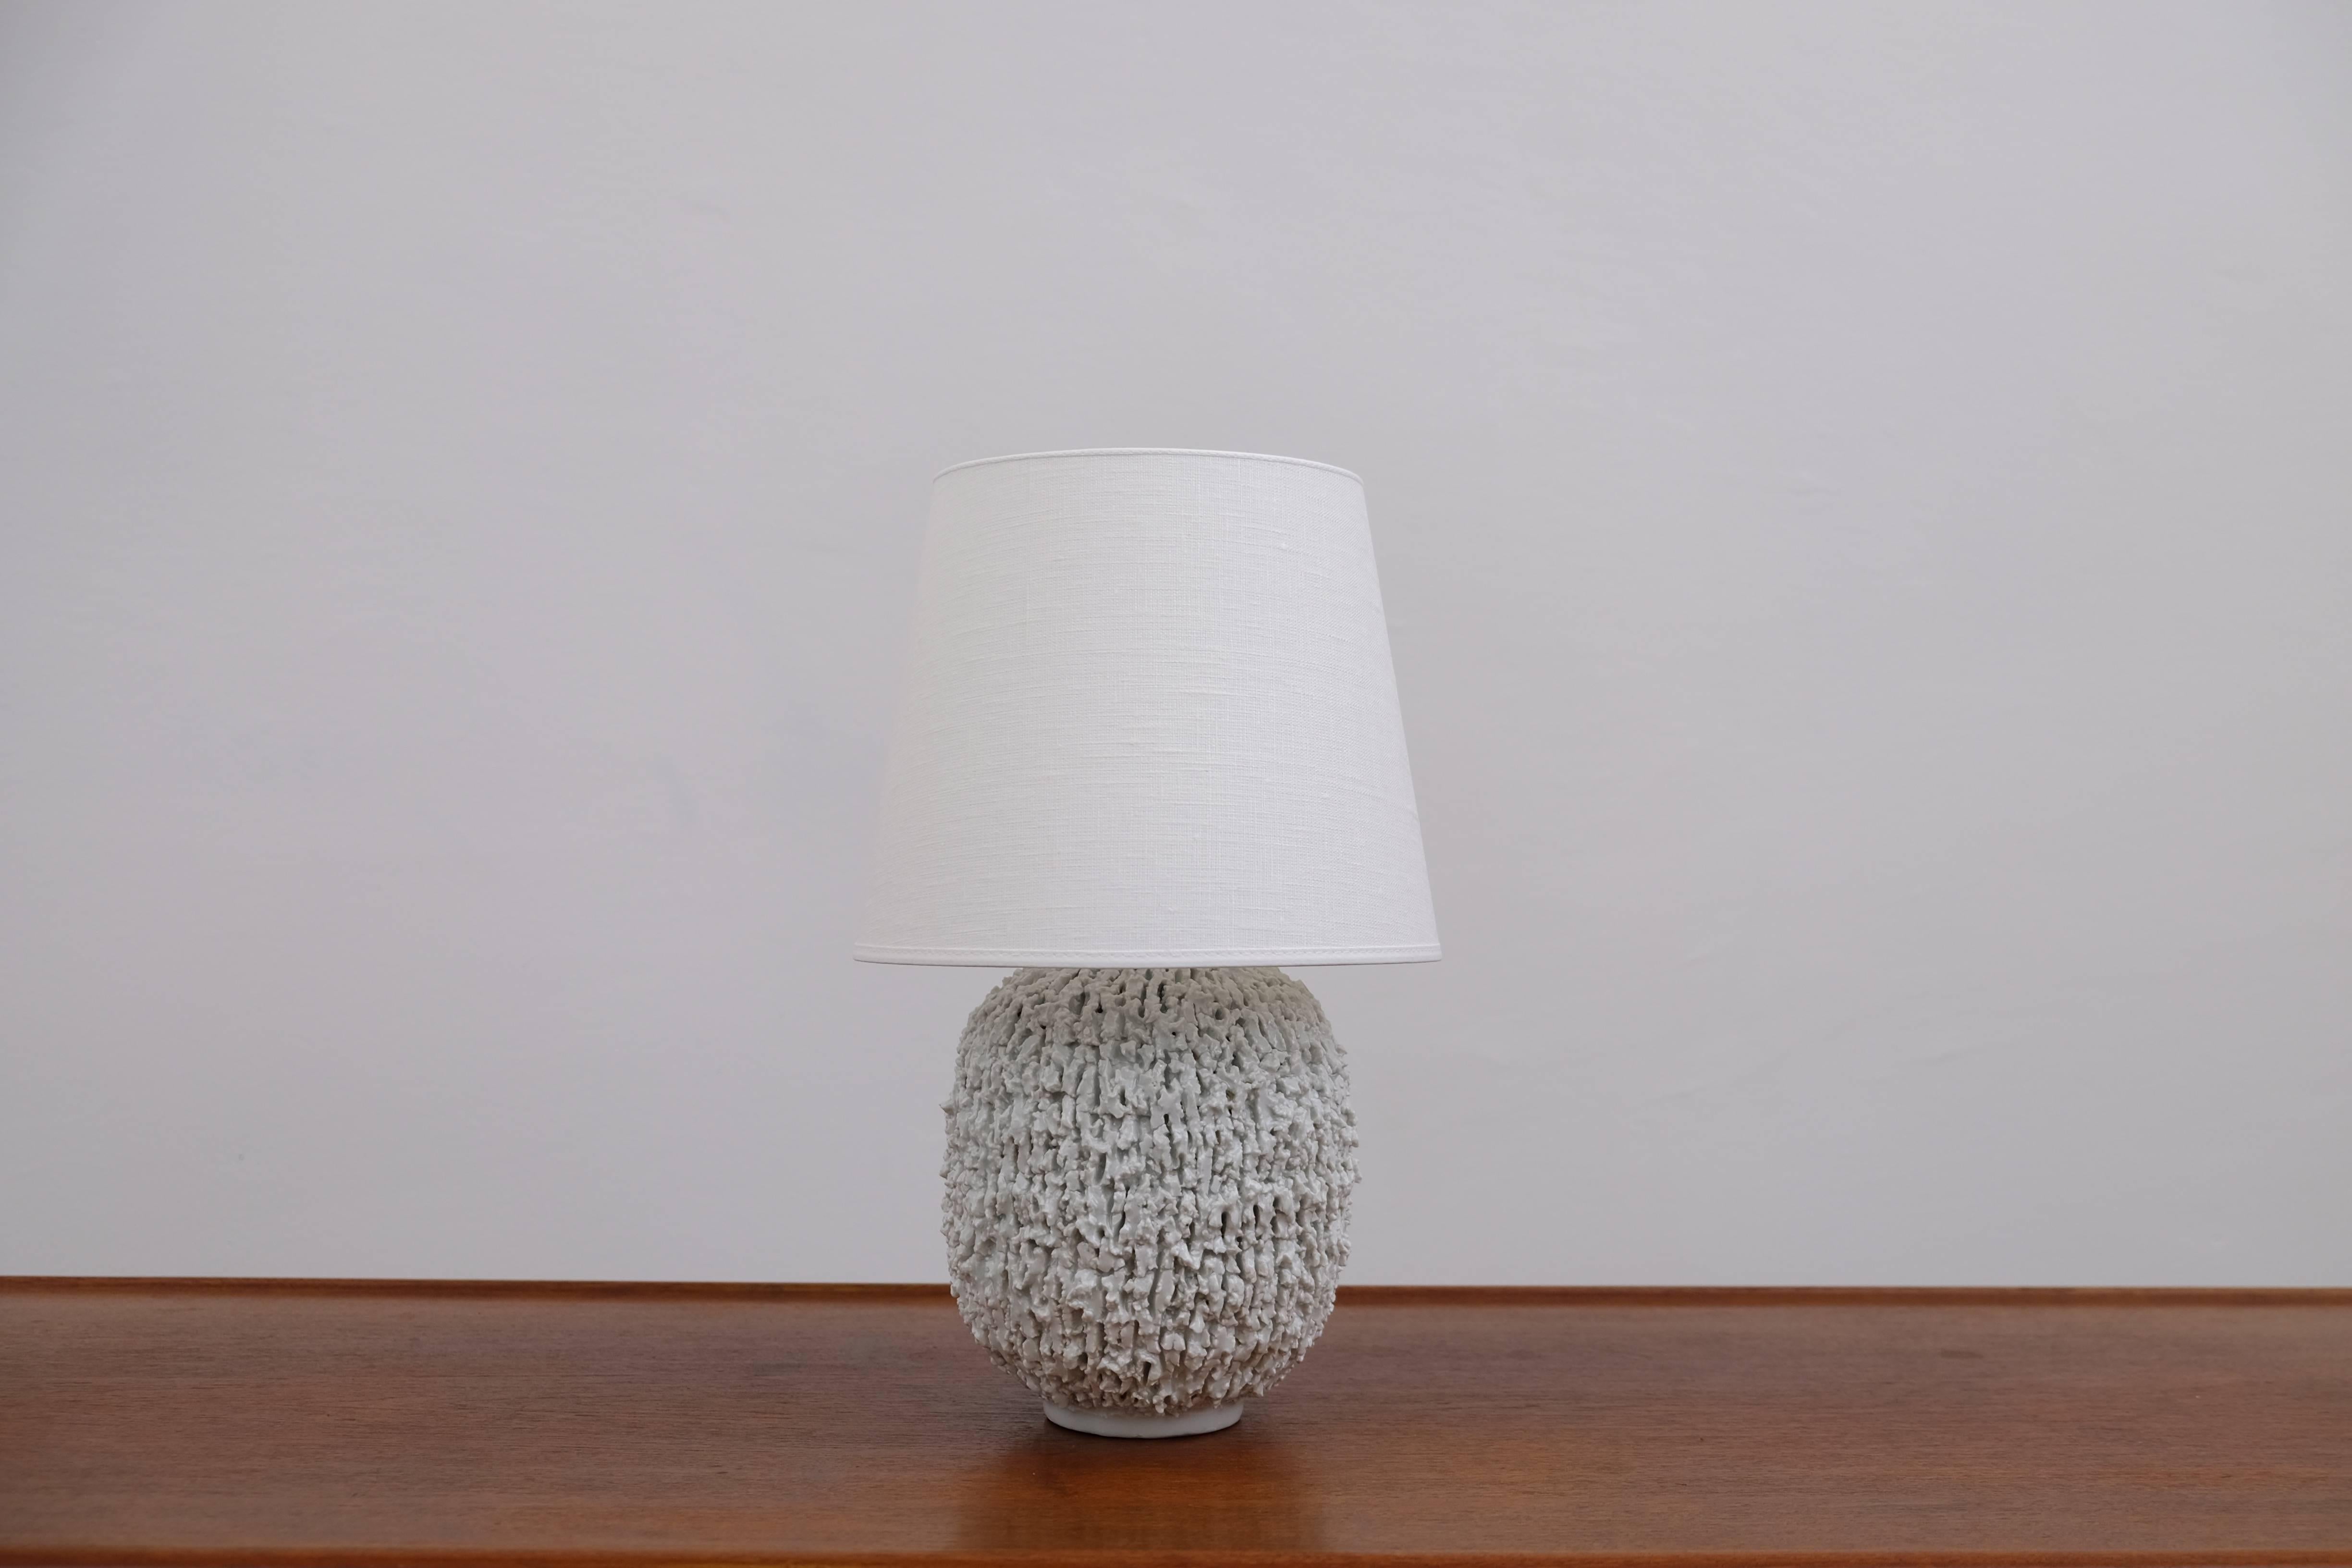 Ceramic lamp in bulbous shape by Gunnar Nylund, composed of chamotte clay and glazed with a white colored luster glaze. Produced by Rörstrand. Stamped.